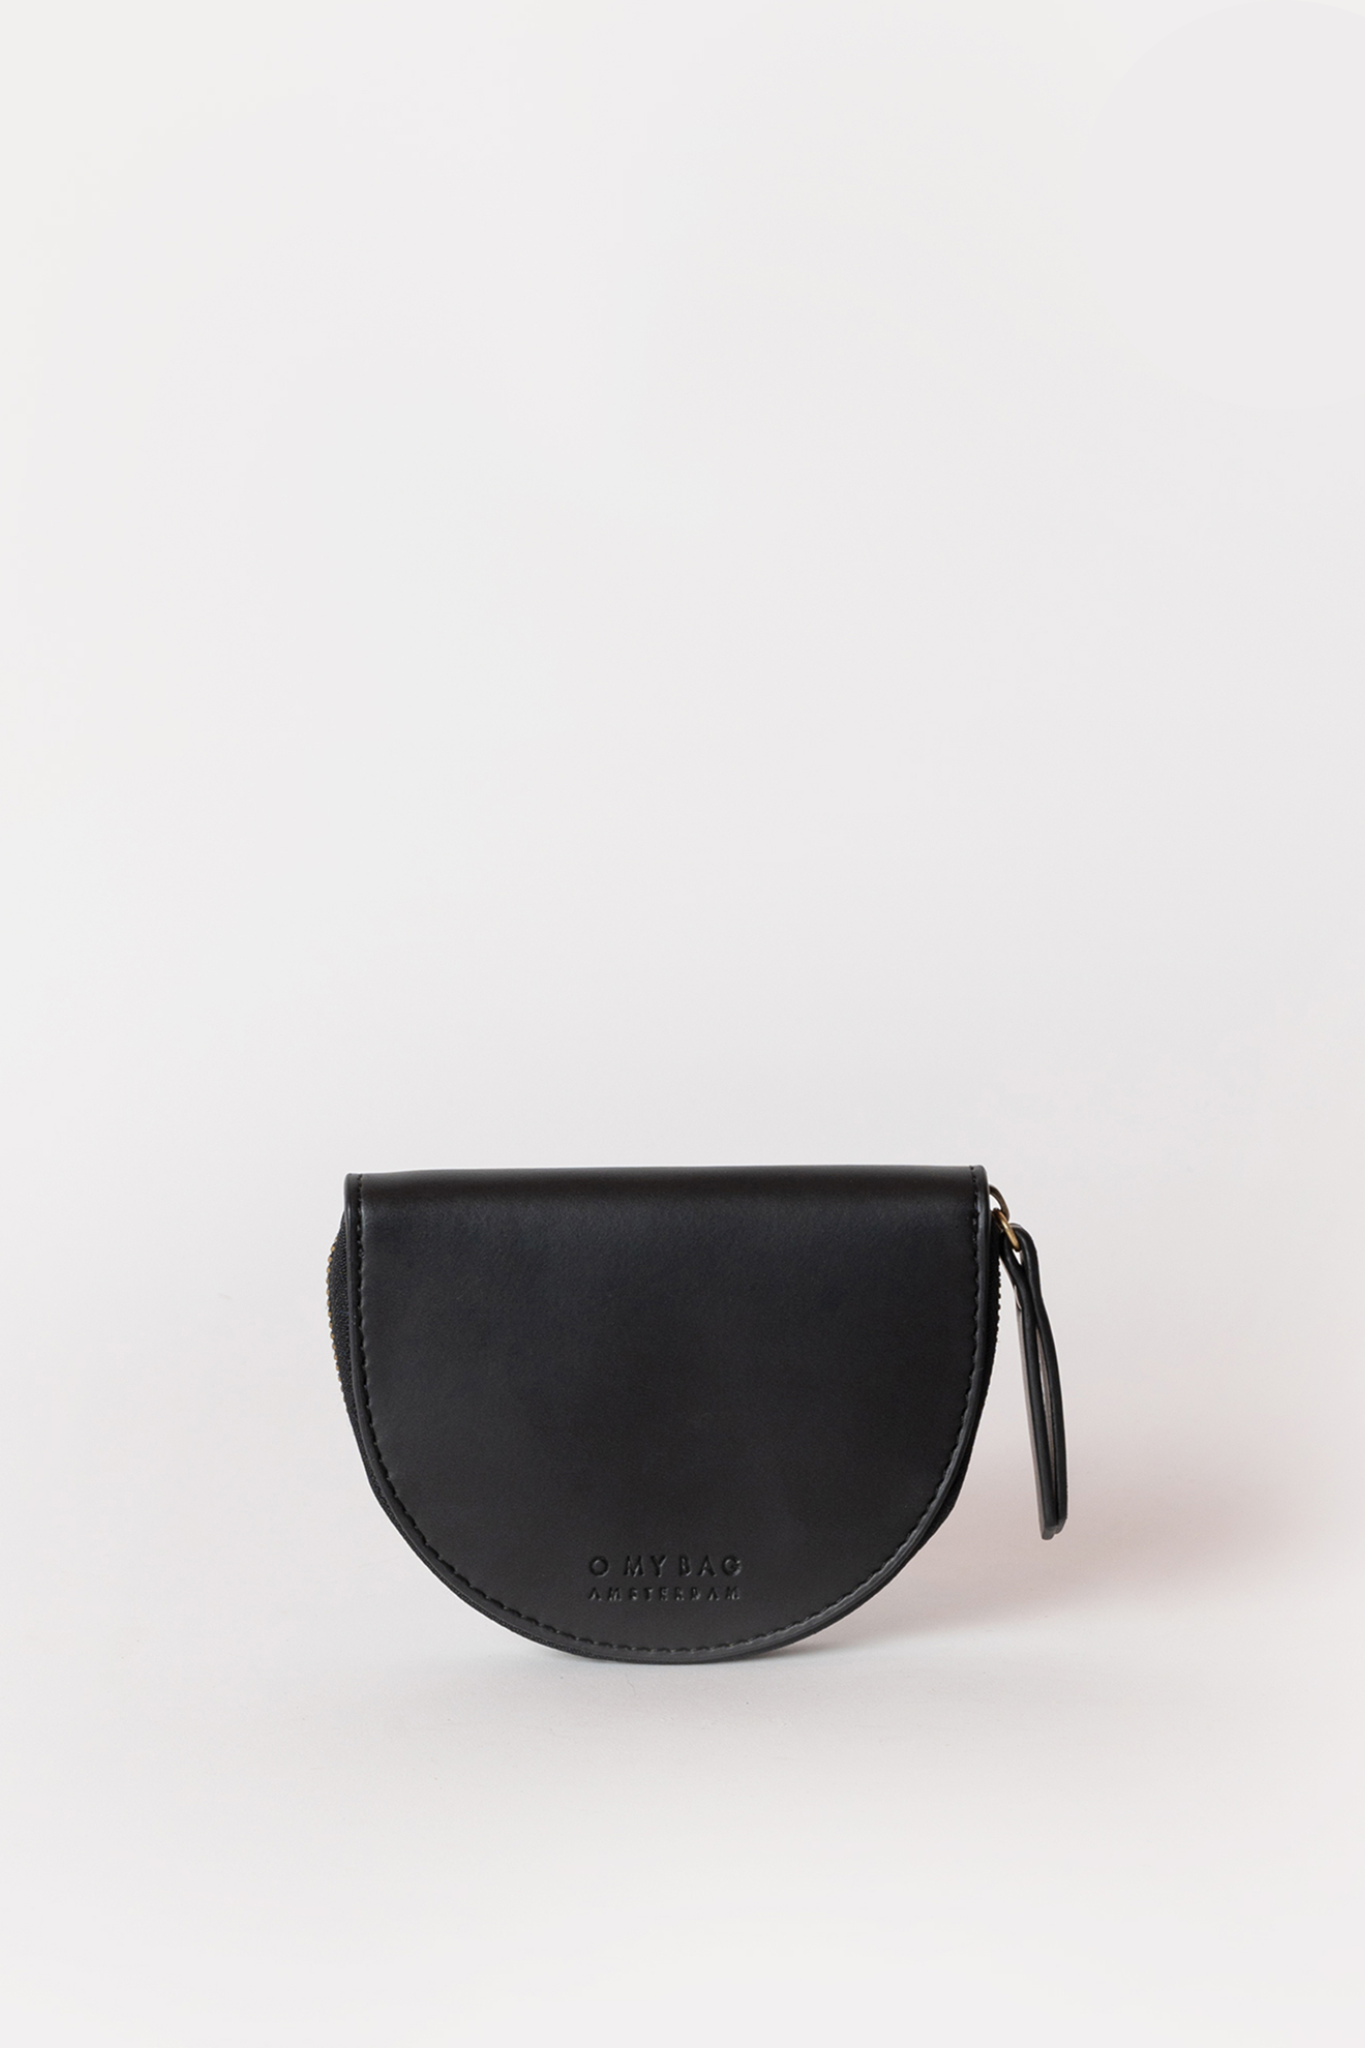 LAURA COIN PURSE - BLACK CLASSIC LEATHER